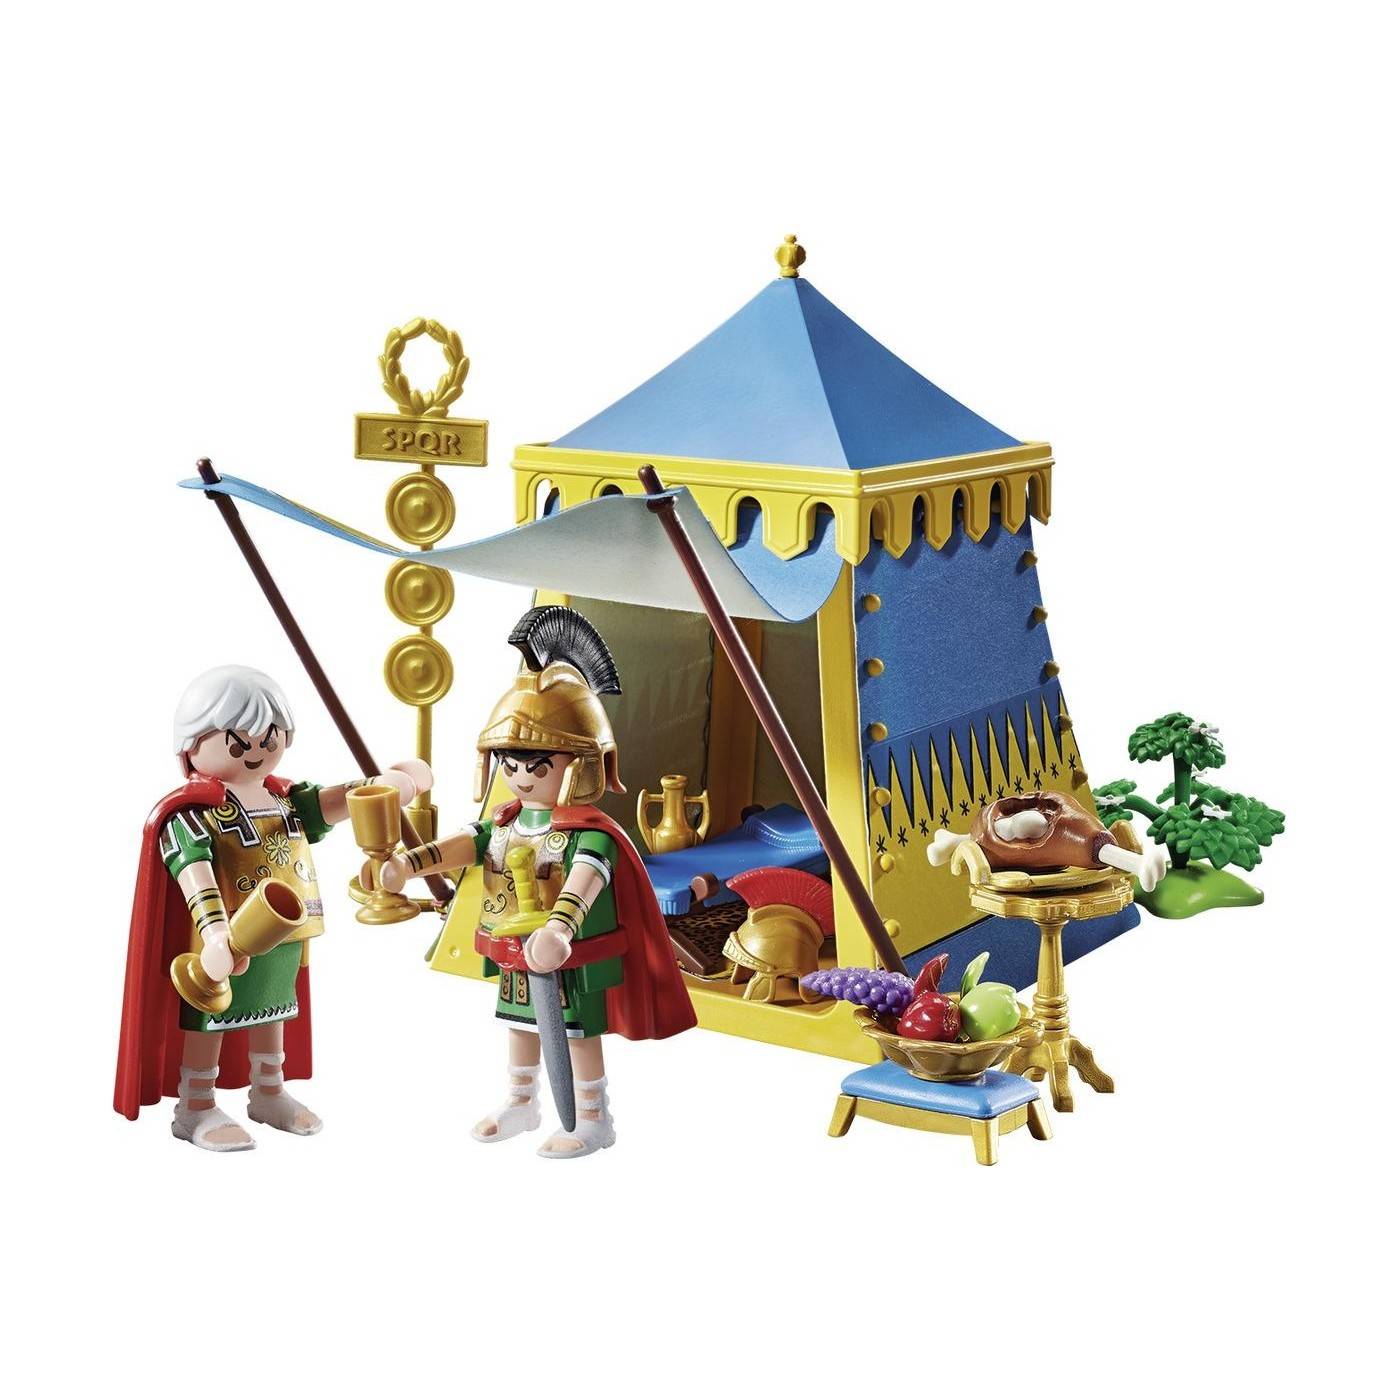 PLAYMOBIL 71015 ASTERIX: LEADER`S TENT WITH GENERALS